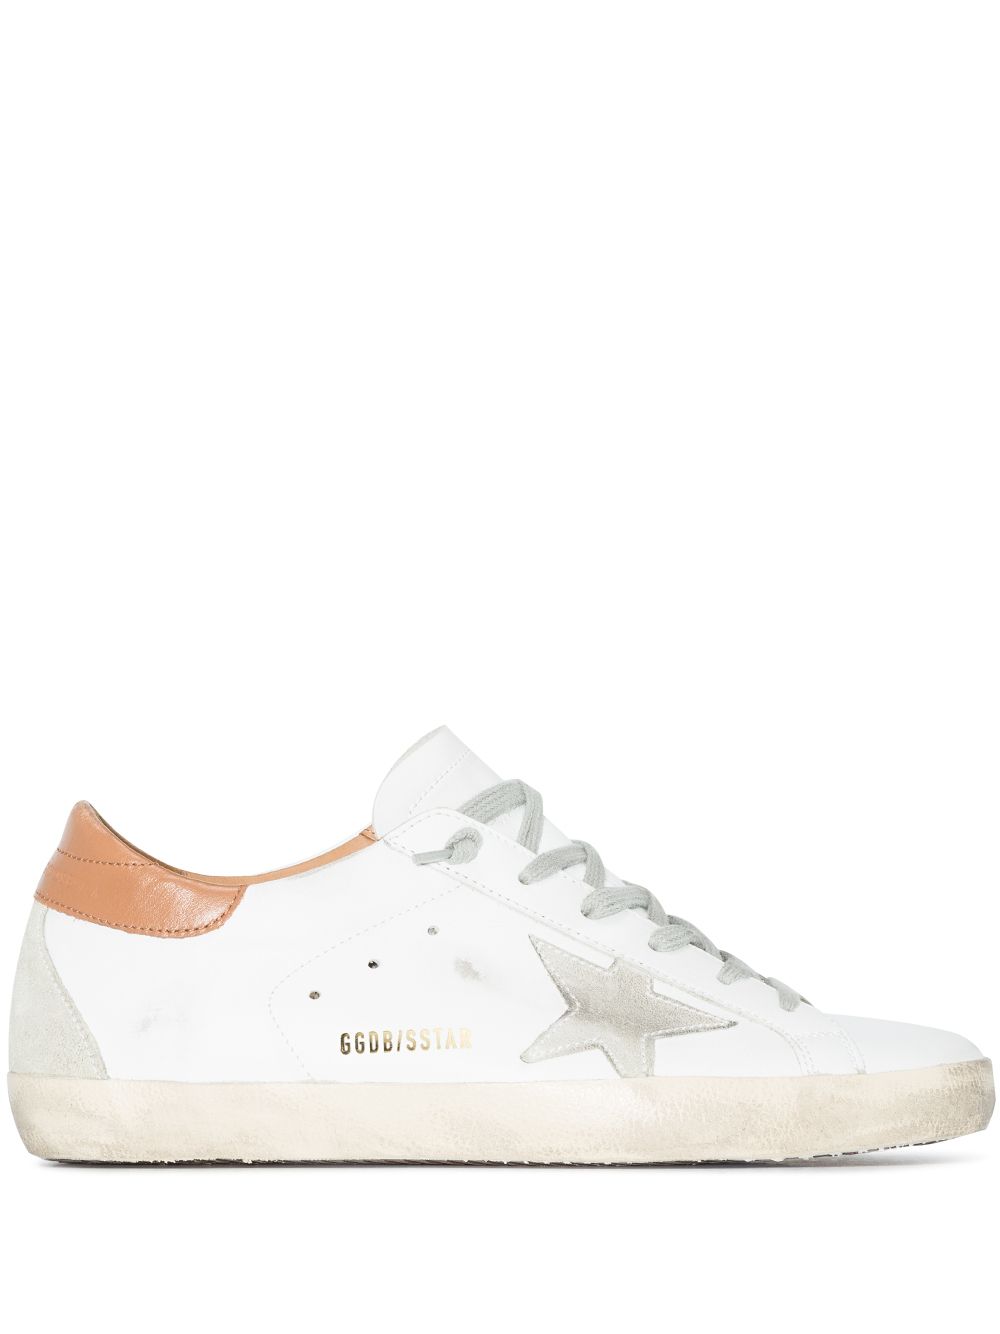 GOLDEN GOOSE White Leather Star Sneakers for Women